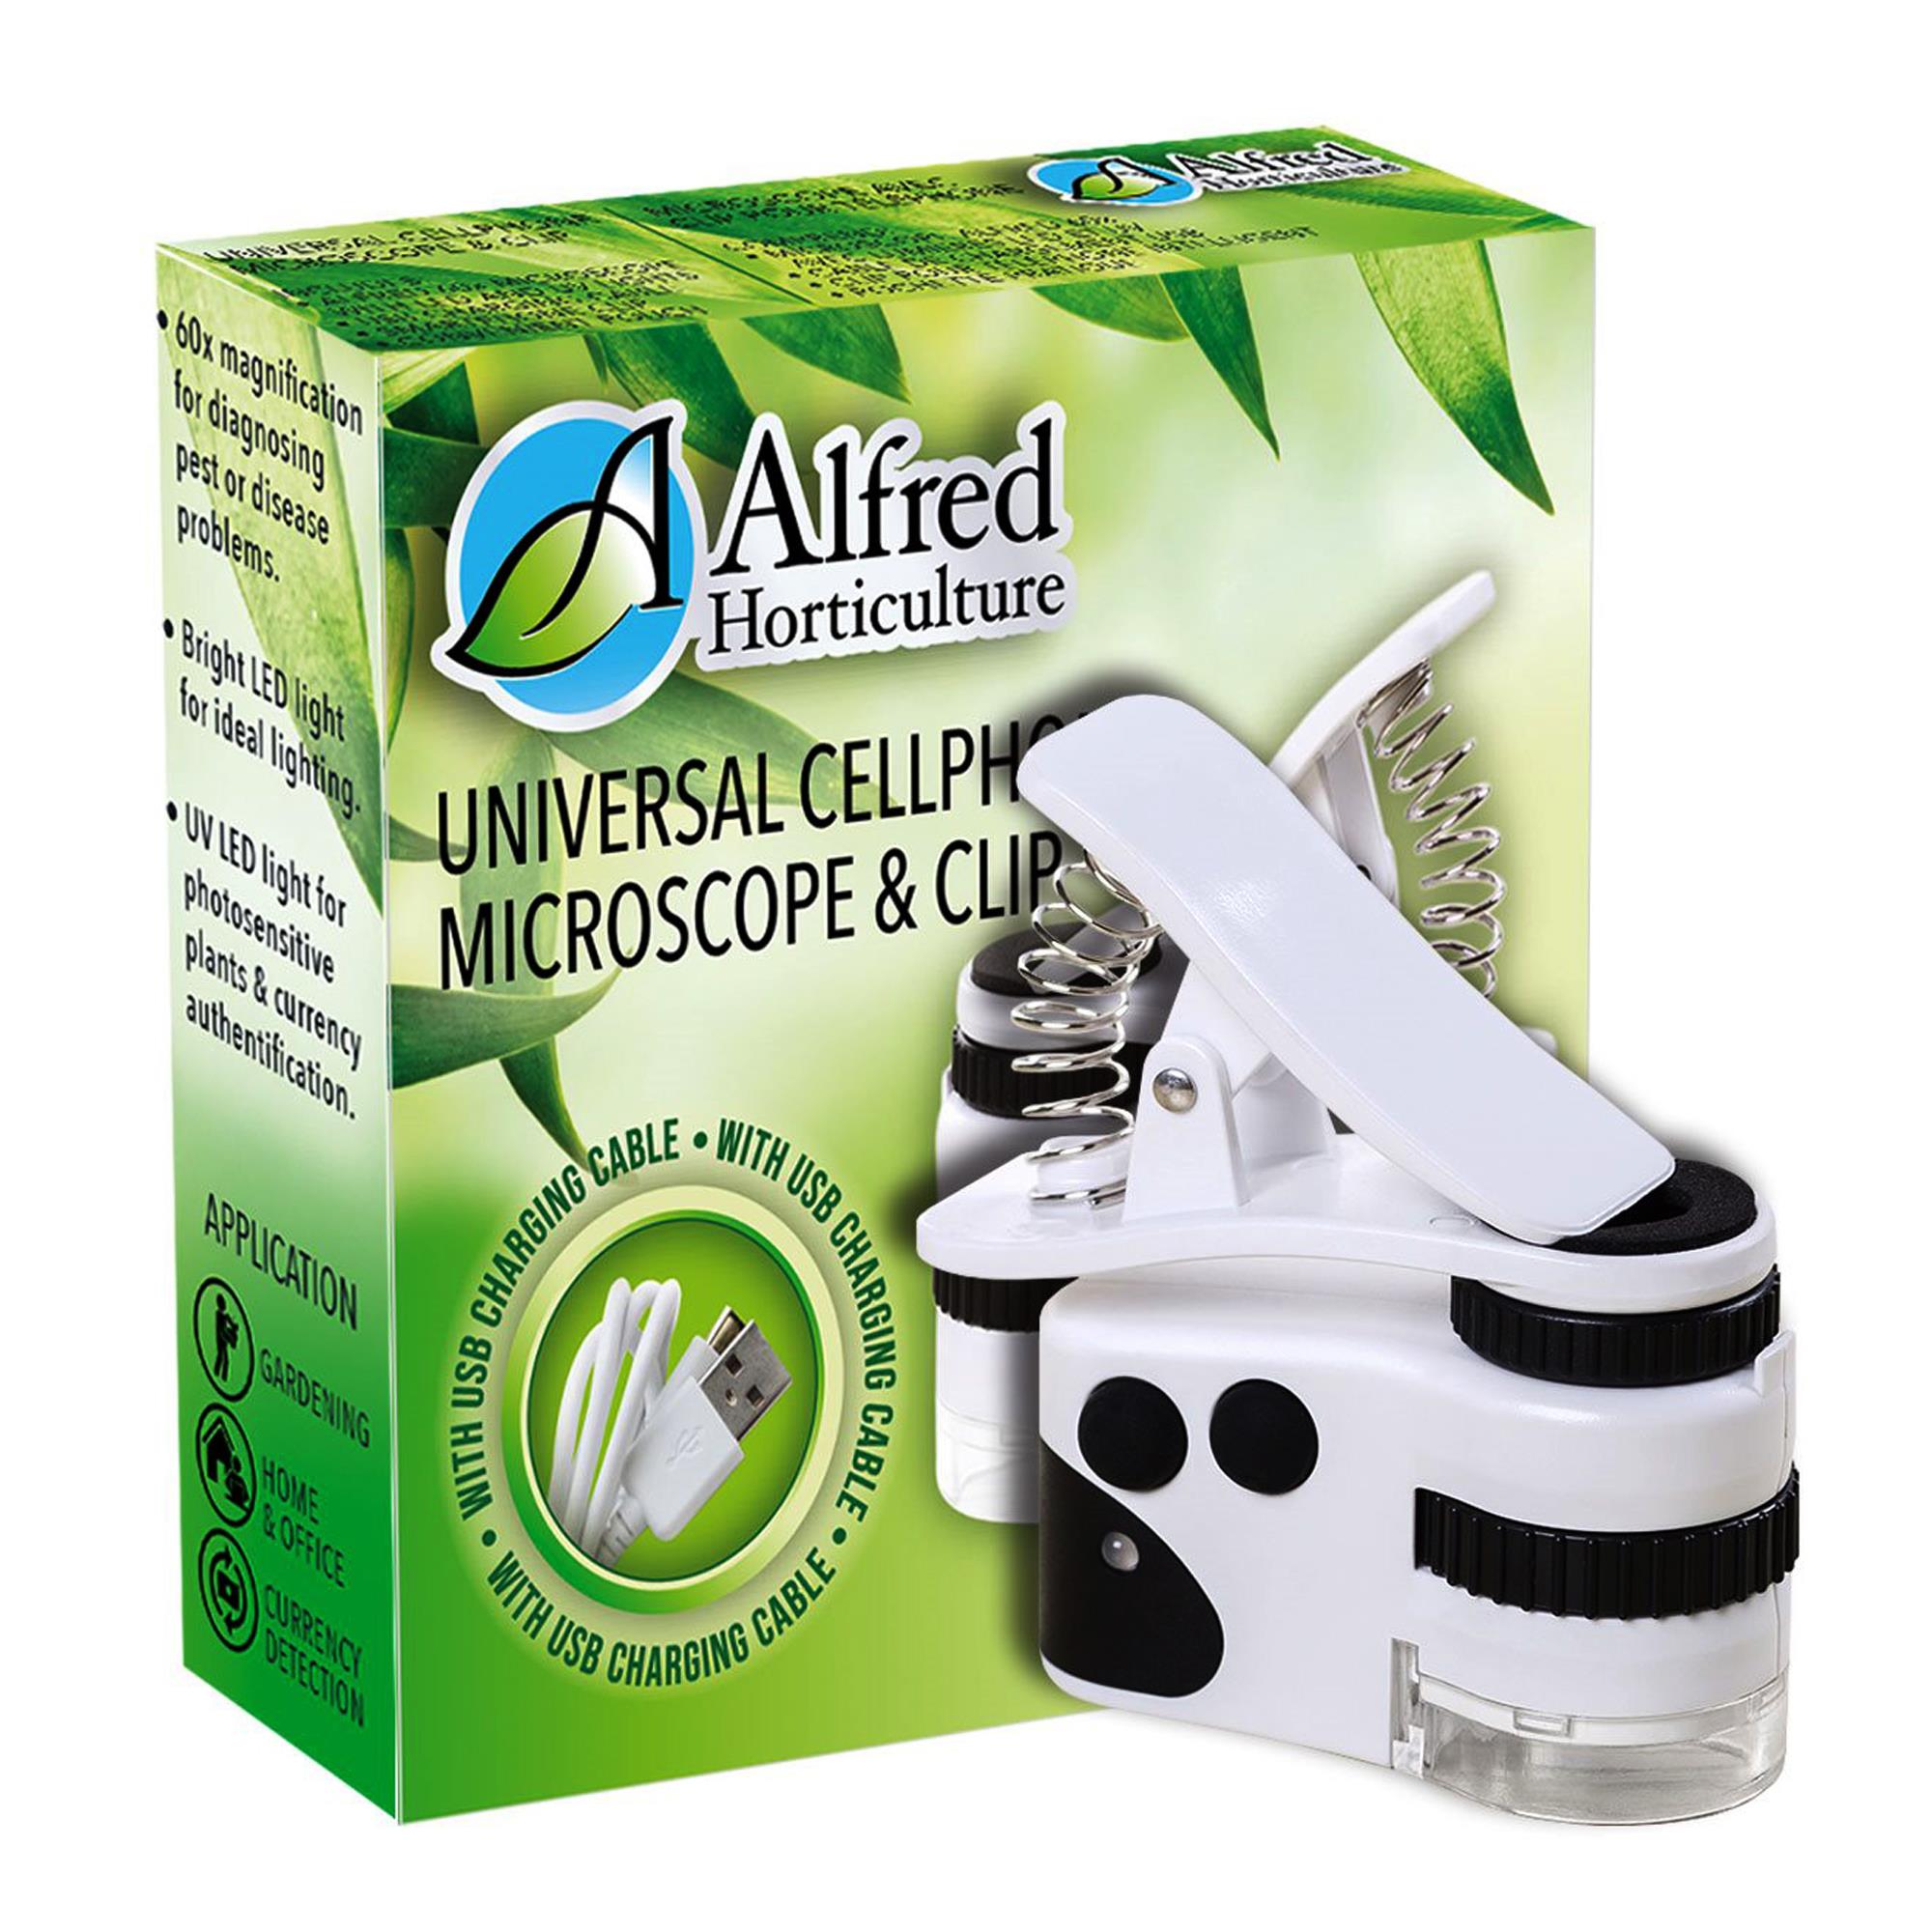 ALFRED HORTICULTURE UNIVERSAL CELLPHONE LED MICROSCOPE 60X